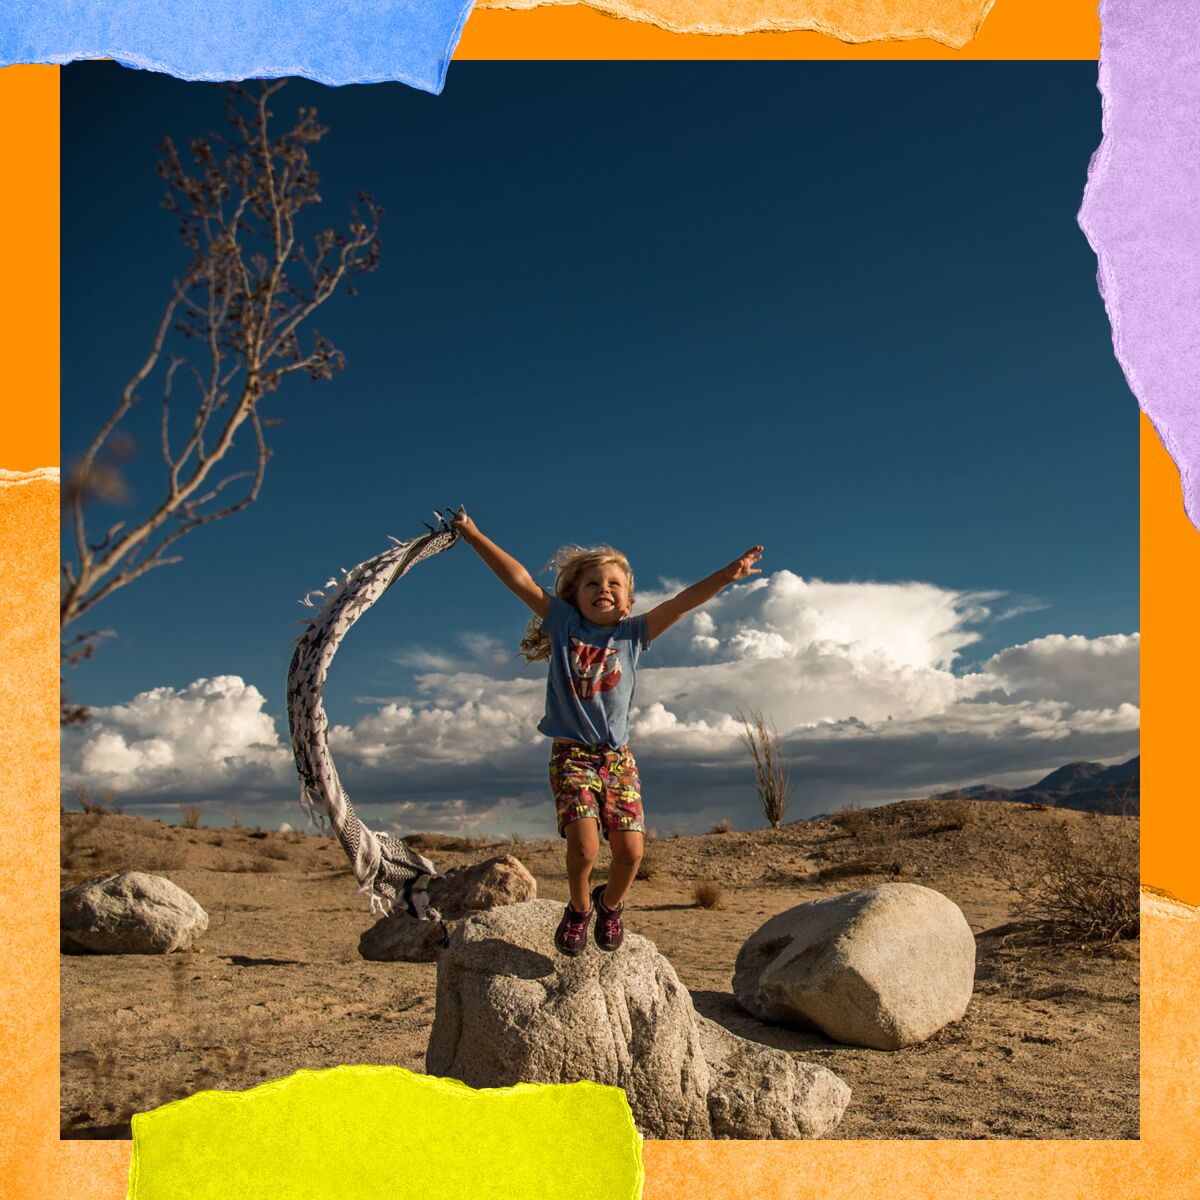 A child jumps of a desert rock gleefully while holding a piece of fabric that blows in the wind.